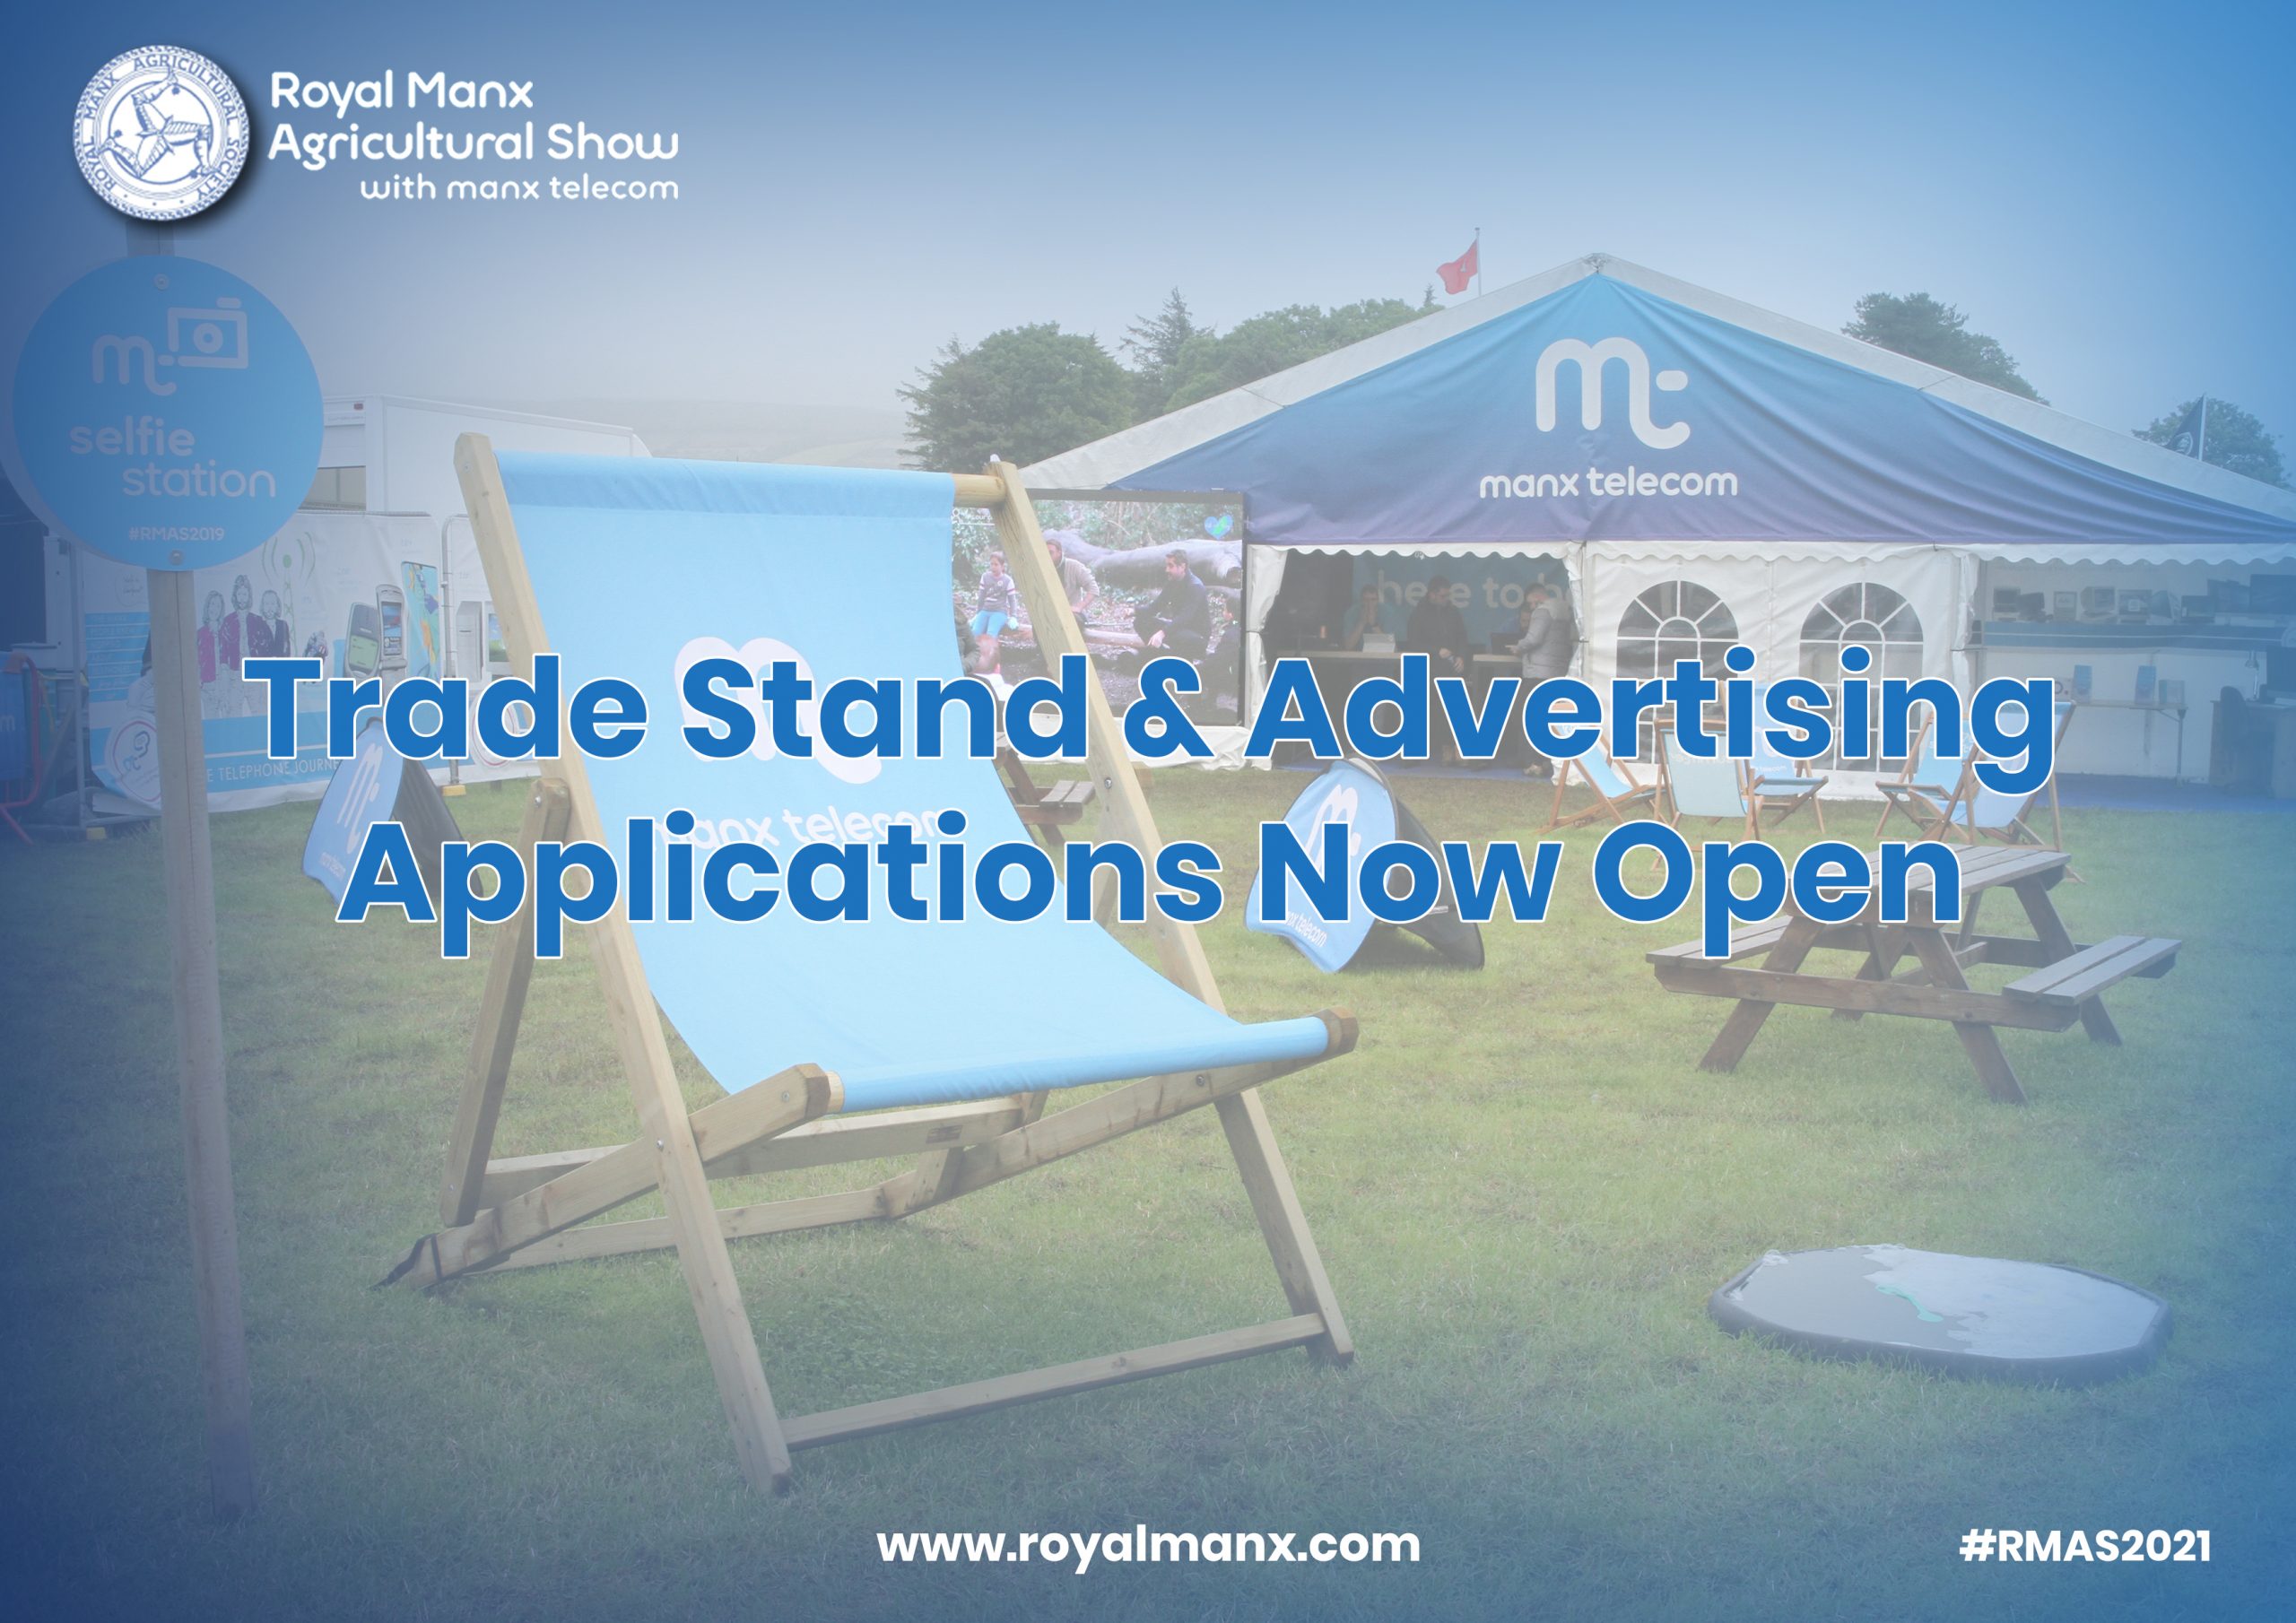 Trade Stand & Advertising Applications Now Open